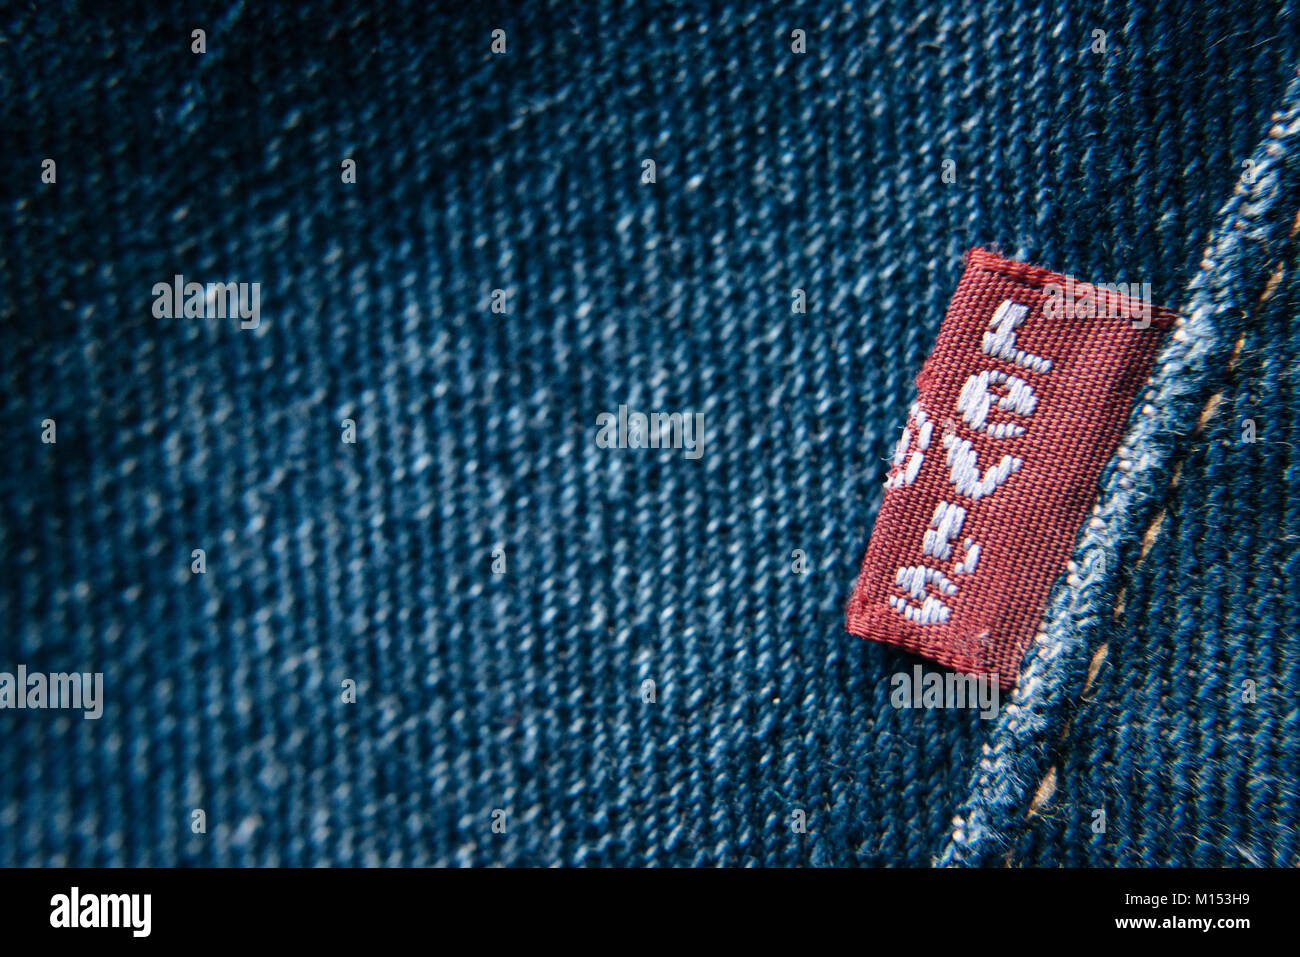 Petaling Jaya,Selangor,Malaysia - Jan 24th 2018 : closeup detail of levi's  red tag on levi's jeans. Levi Strauss is a famous American clothing company  Stock Photo - Alamy